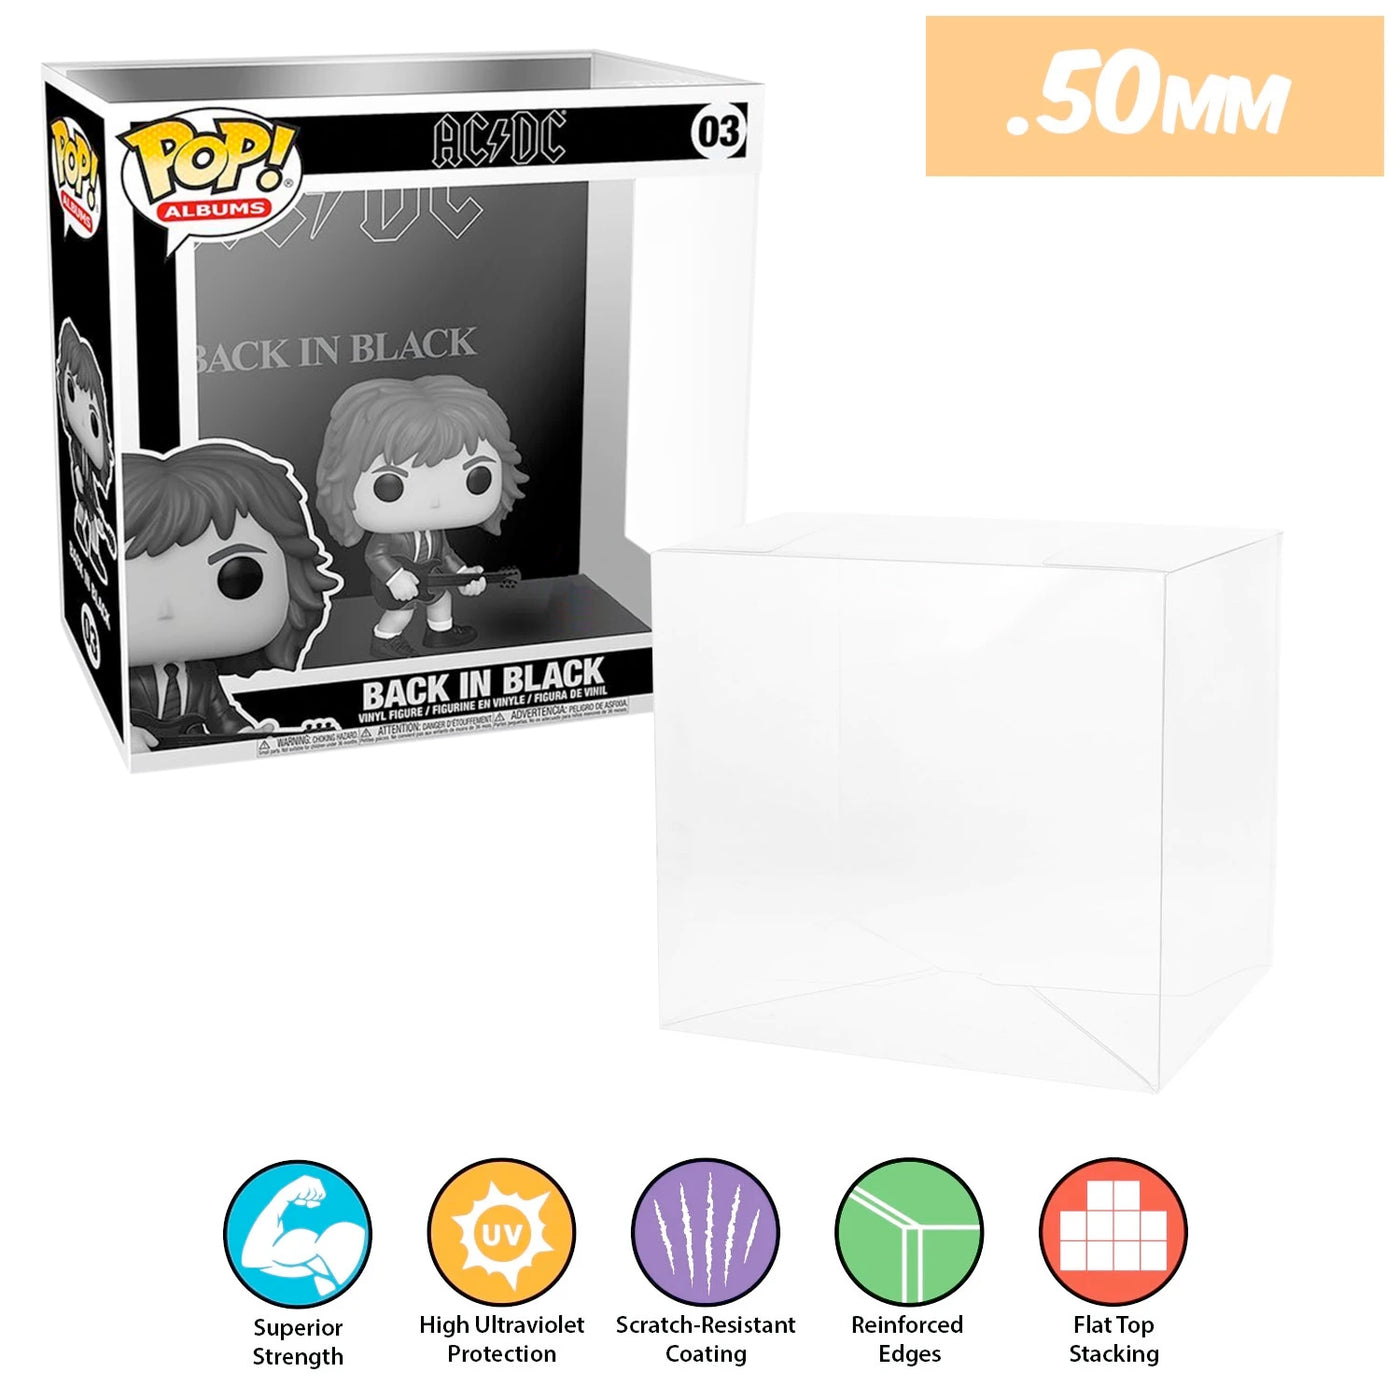 03 acdc back in black pop albums best funko pop protectors thick strong uv scratch flat top stack vinyl display geek plastic shield vaulted eco armor fits collect protect display case kollector protector